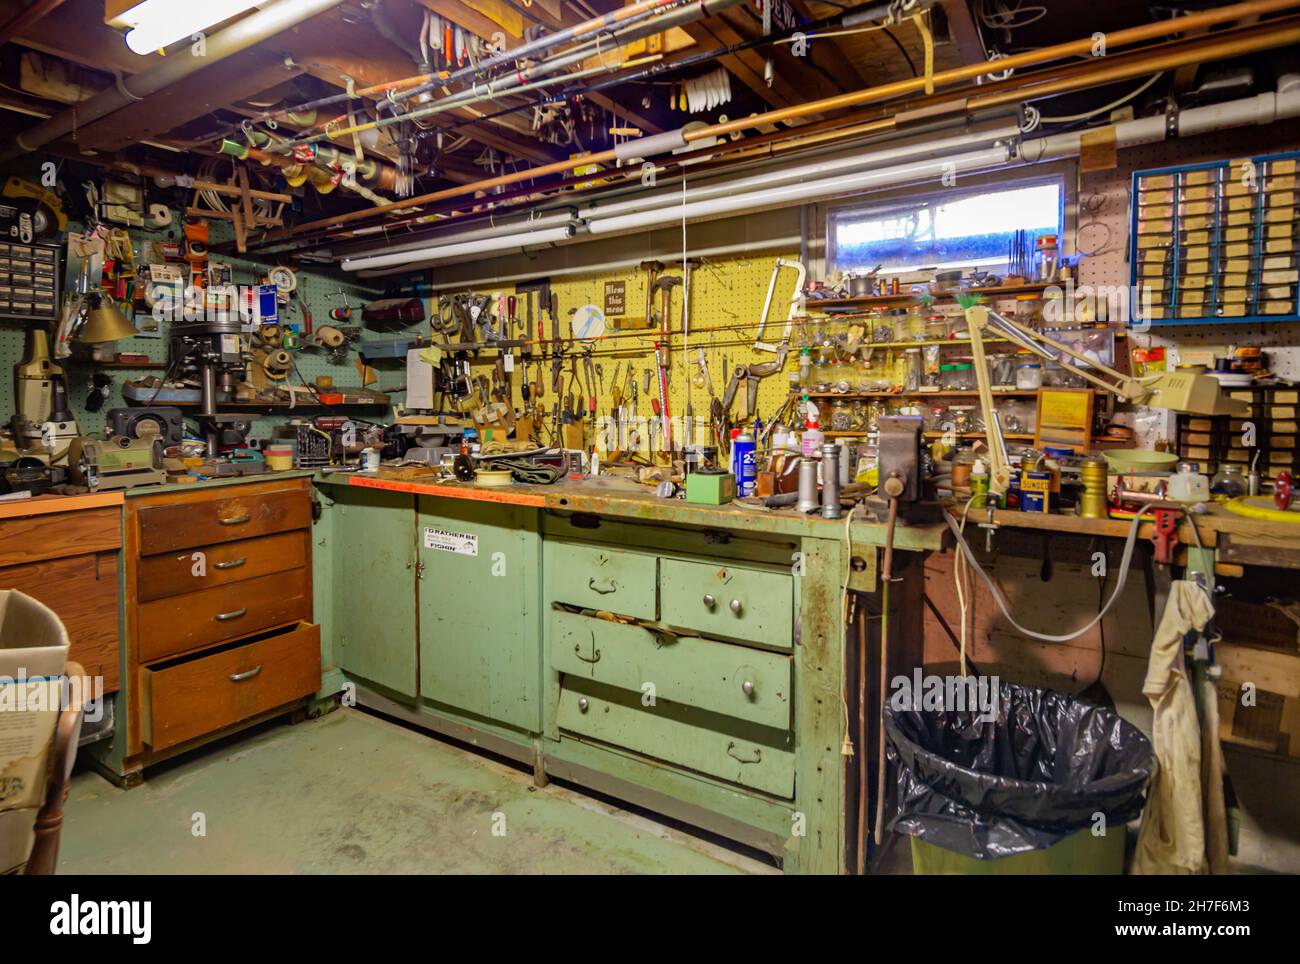 Old basement work shop filled with tools and objects Stock Photo